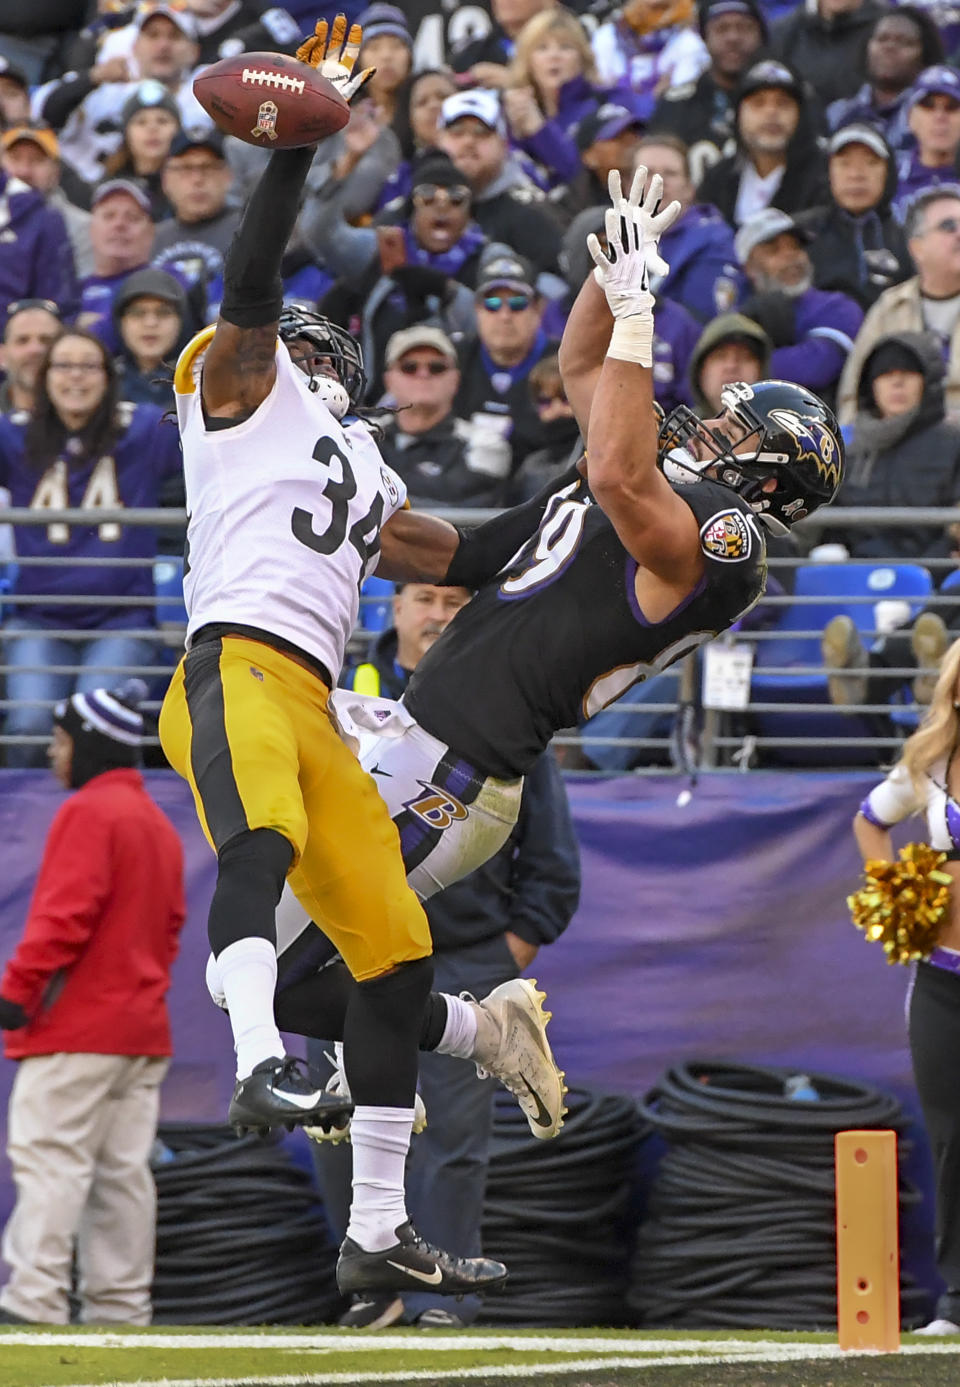 <p>Pittsburgh Steelers strong safety Terrell Edmunds (34) is called for pass interference on a pass to Baltimore Ravens tight end Mark Andrews (89) on November 4, 2018, at M&T Bank Stadium in Baltimore, MD. The Pittsburgh Steelers defeated the Baltimore Ravens, 23-16. (Photo by Mark Goldman/Icon Sportswire via Getty Images) </p>